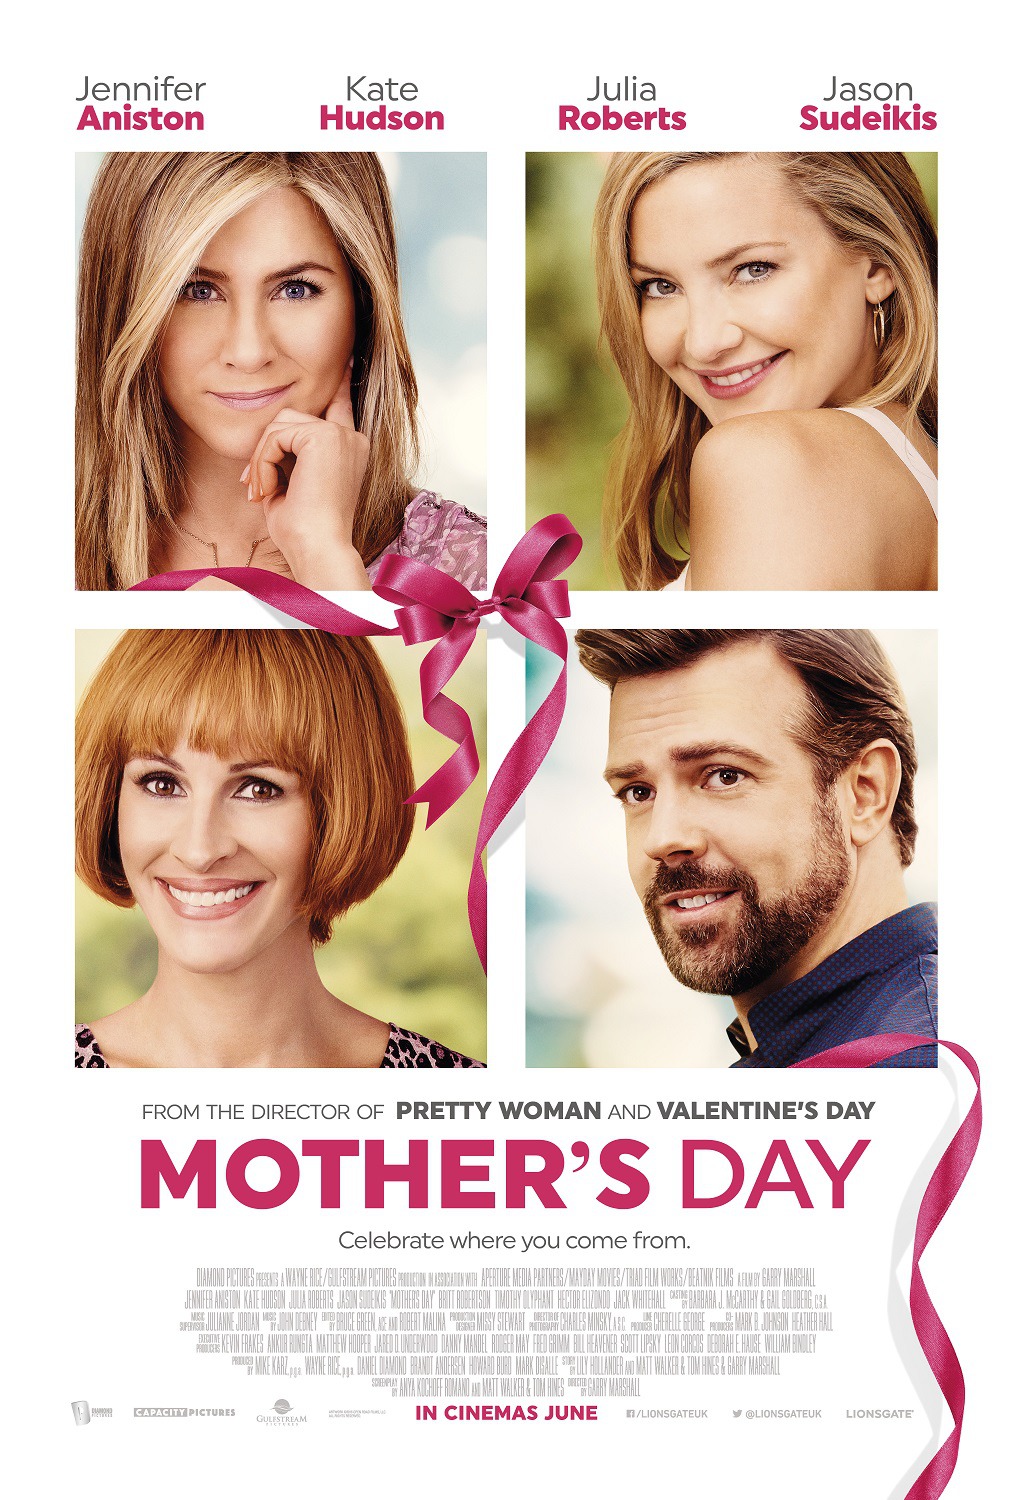 MOTHER'S DAY Trailers, Images and Poster | The Entertainment Factor